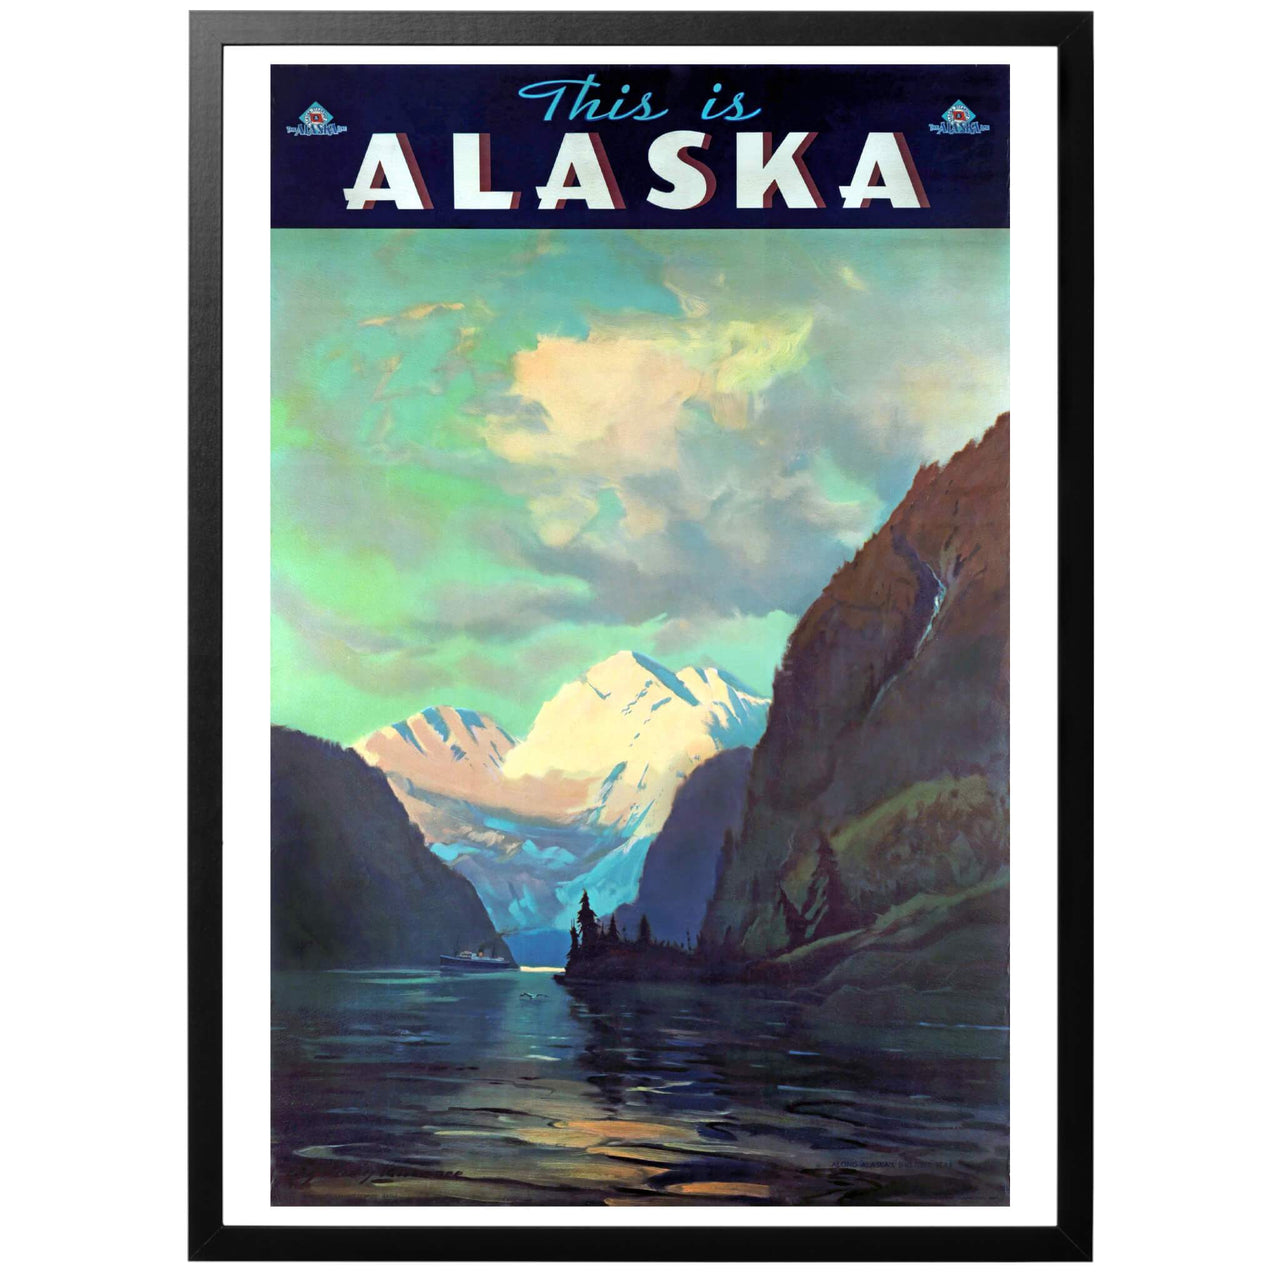 This is Alaska Poster